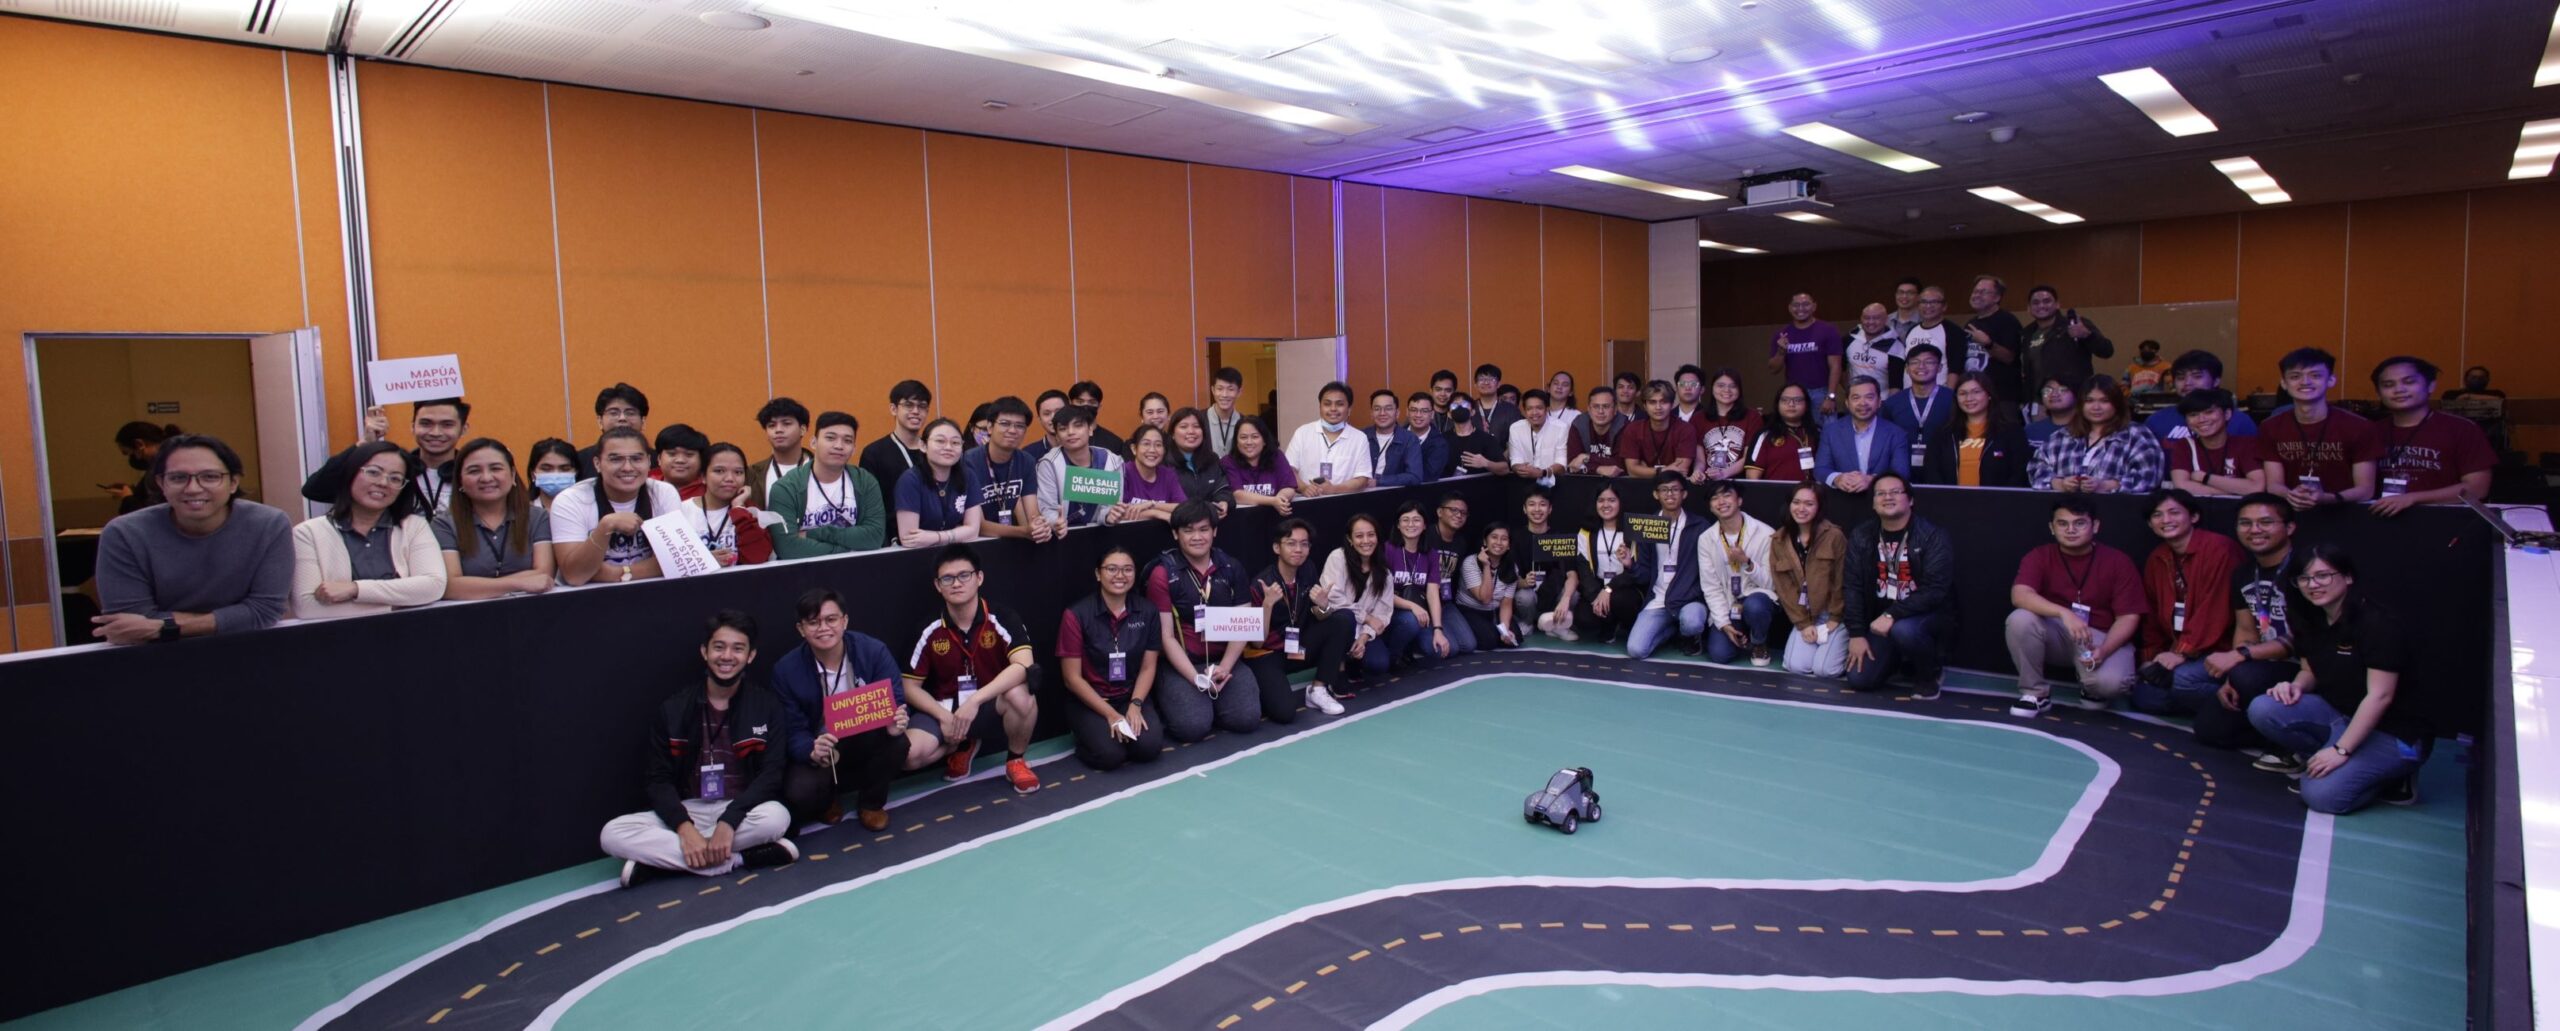 Inter-university AWS DeepRacer organizers from Globe and AWS with participants and guests.